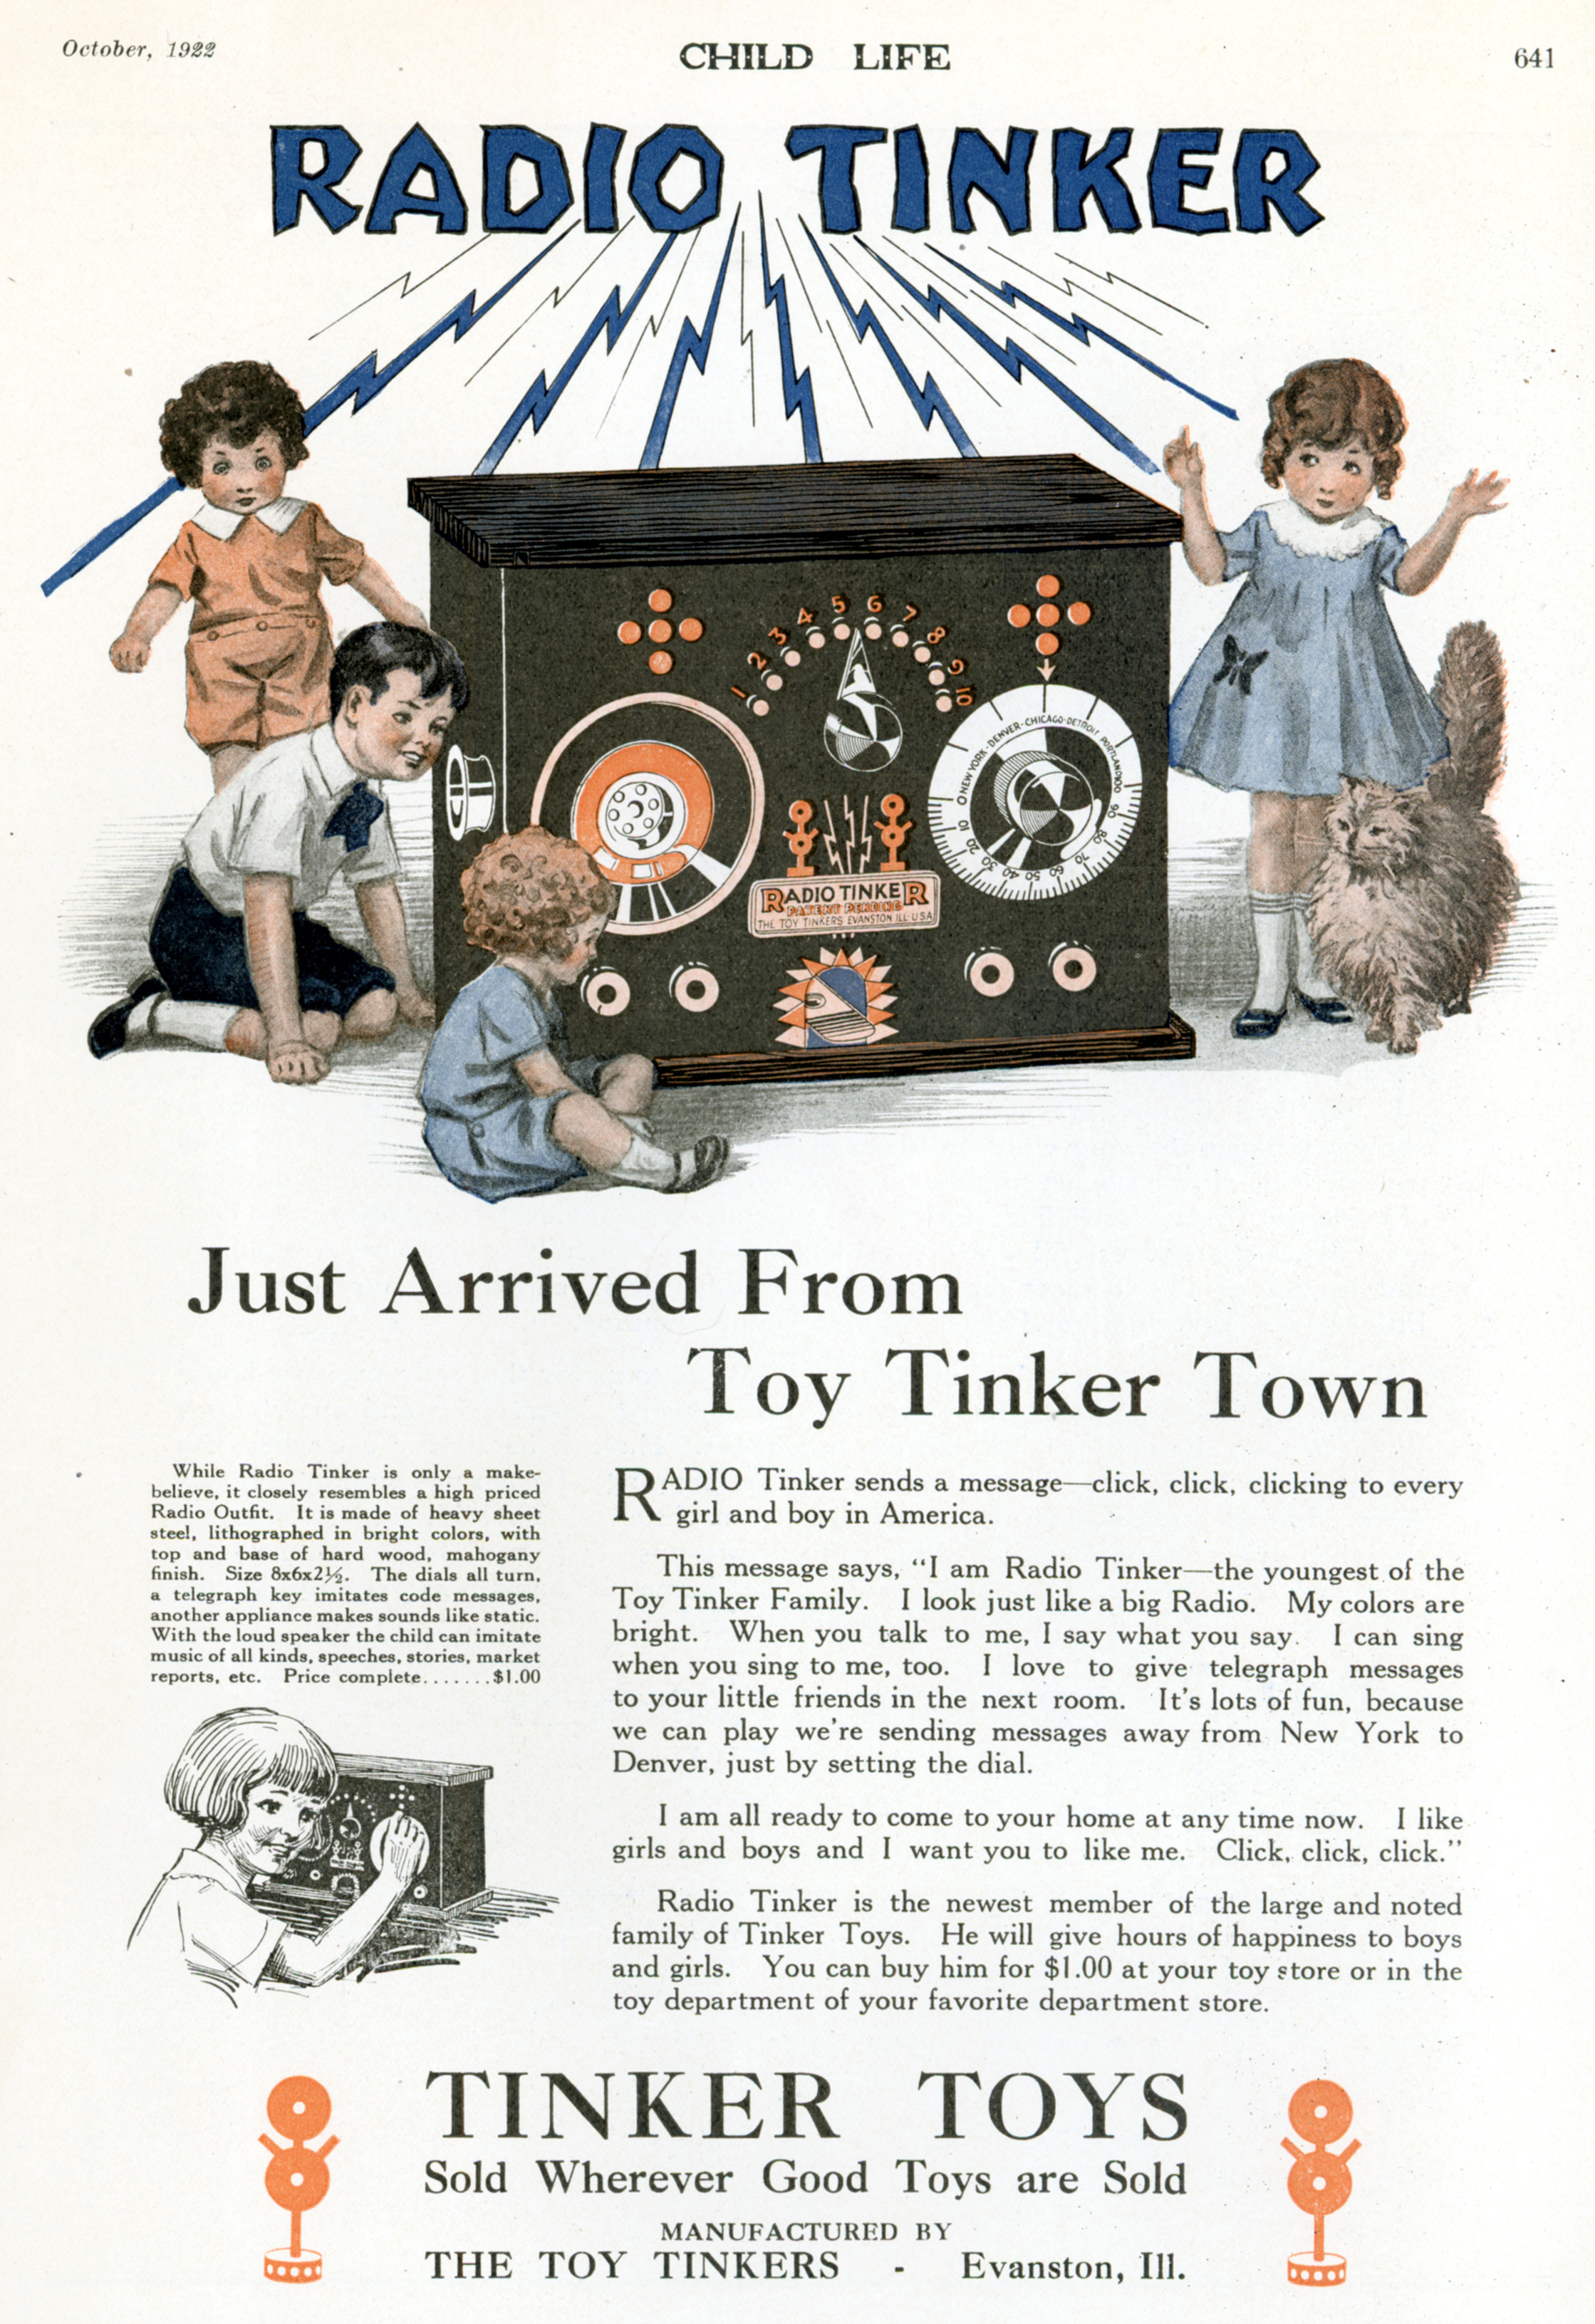 Advertisement for 'Radio Tinker' with a color illustration of small children playing with a large, make-believe radio. Accompanying text describes what the toy does.